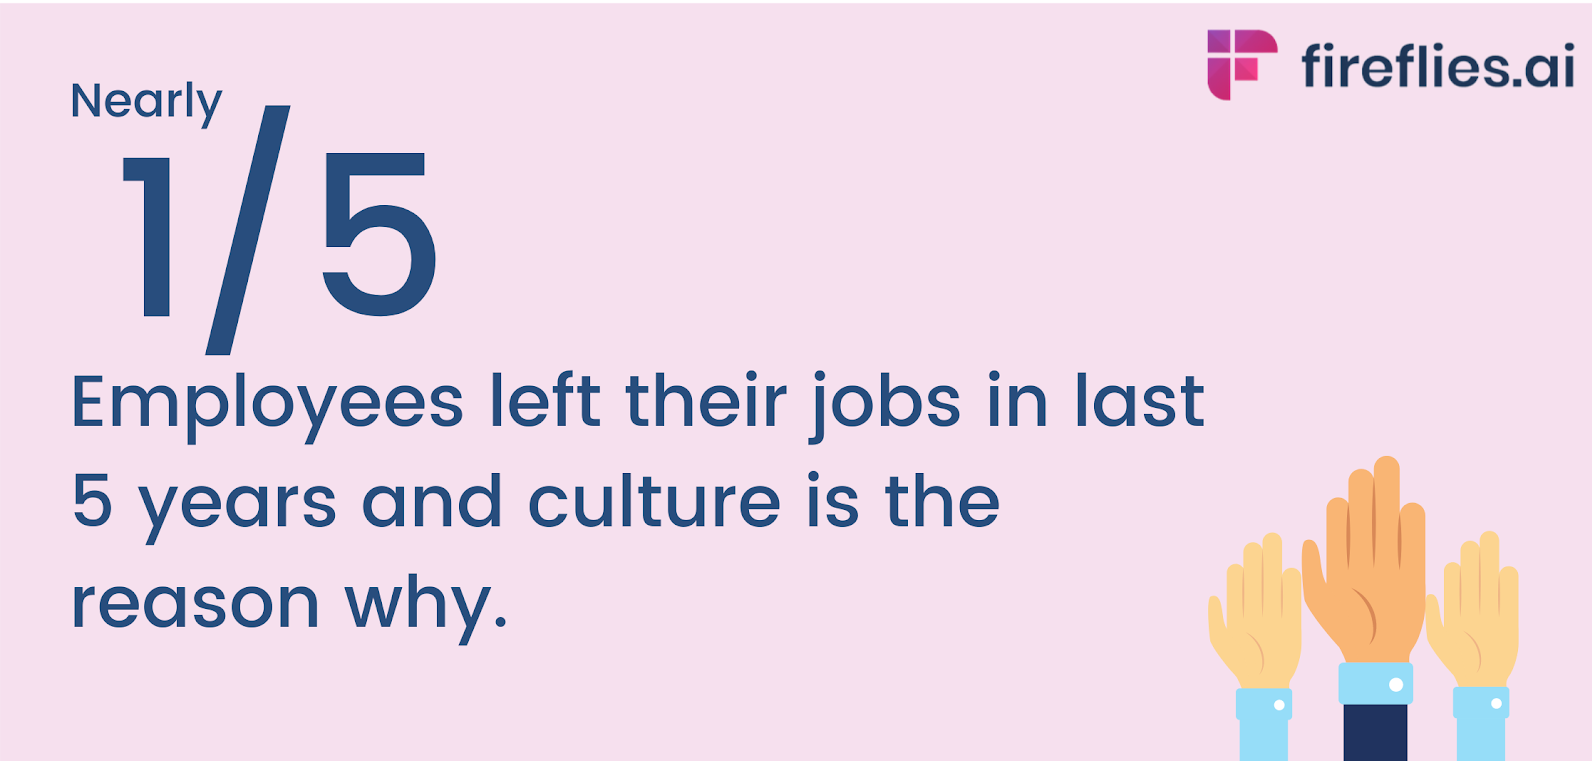 Why is organizational cutlure important? Because 1 out of 5 employees left their jobs in last 5 years due to a bad organizational culture